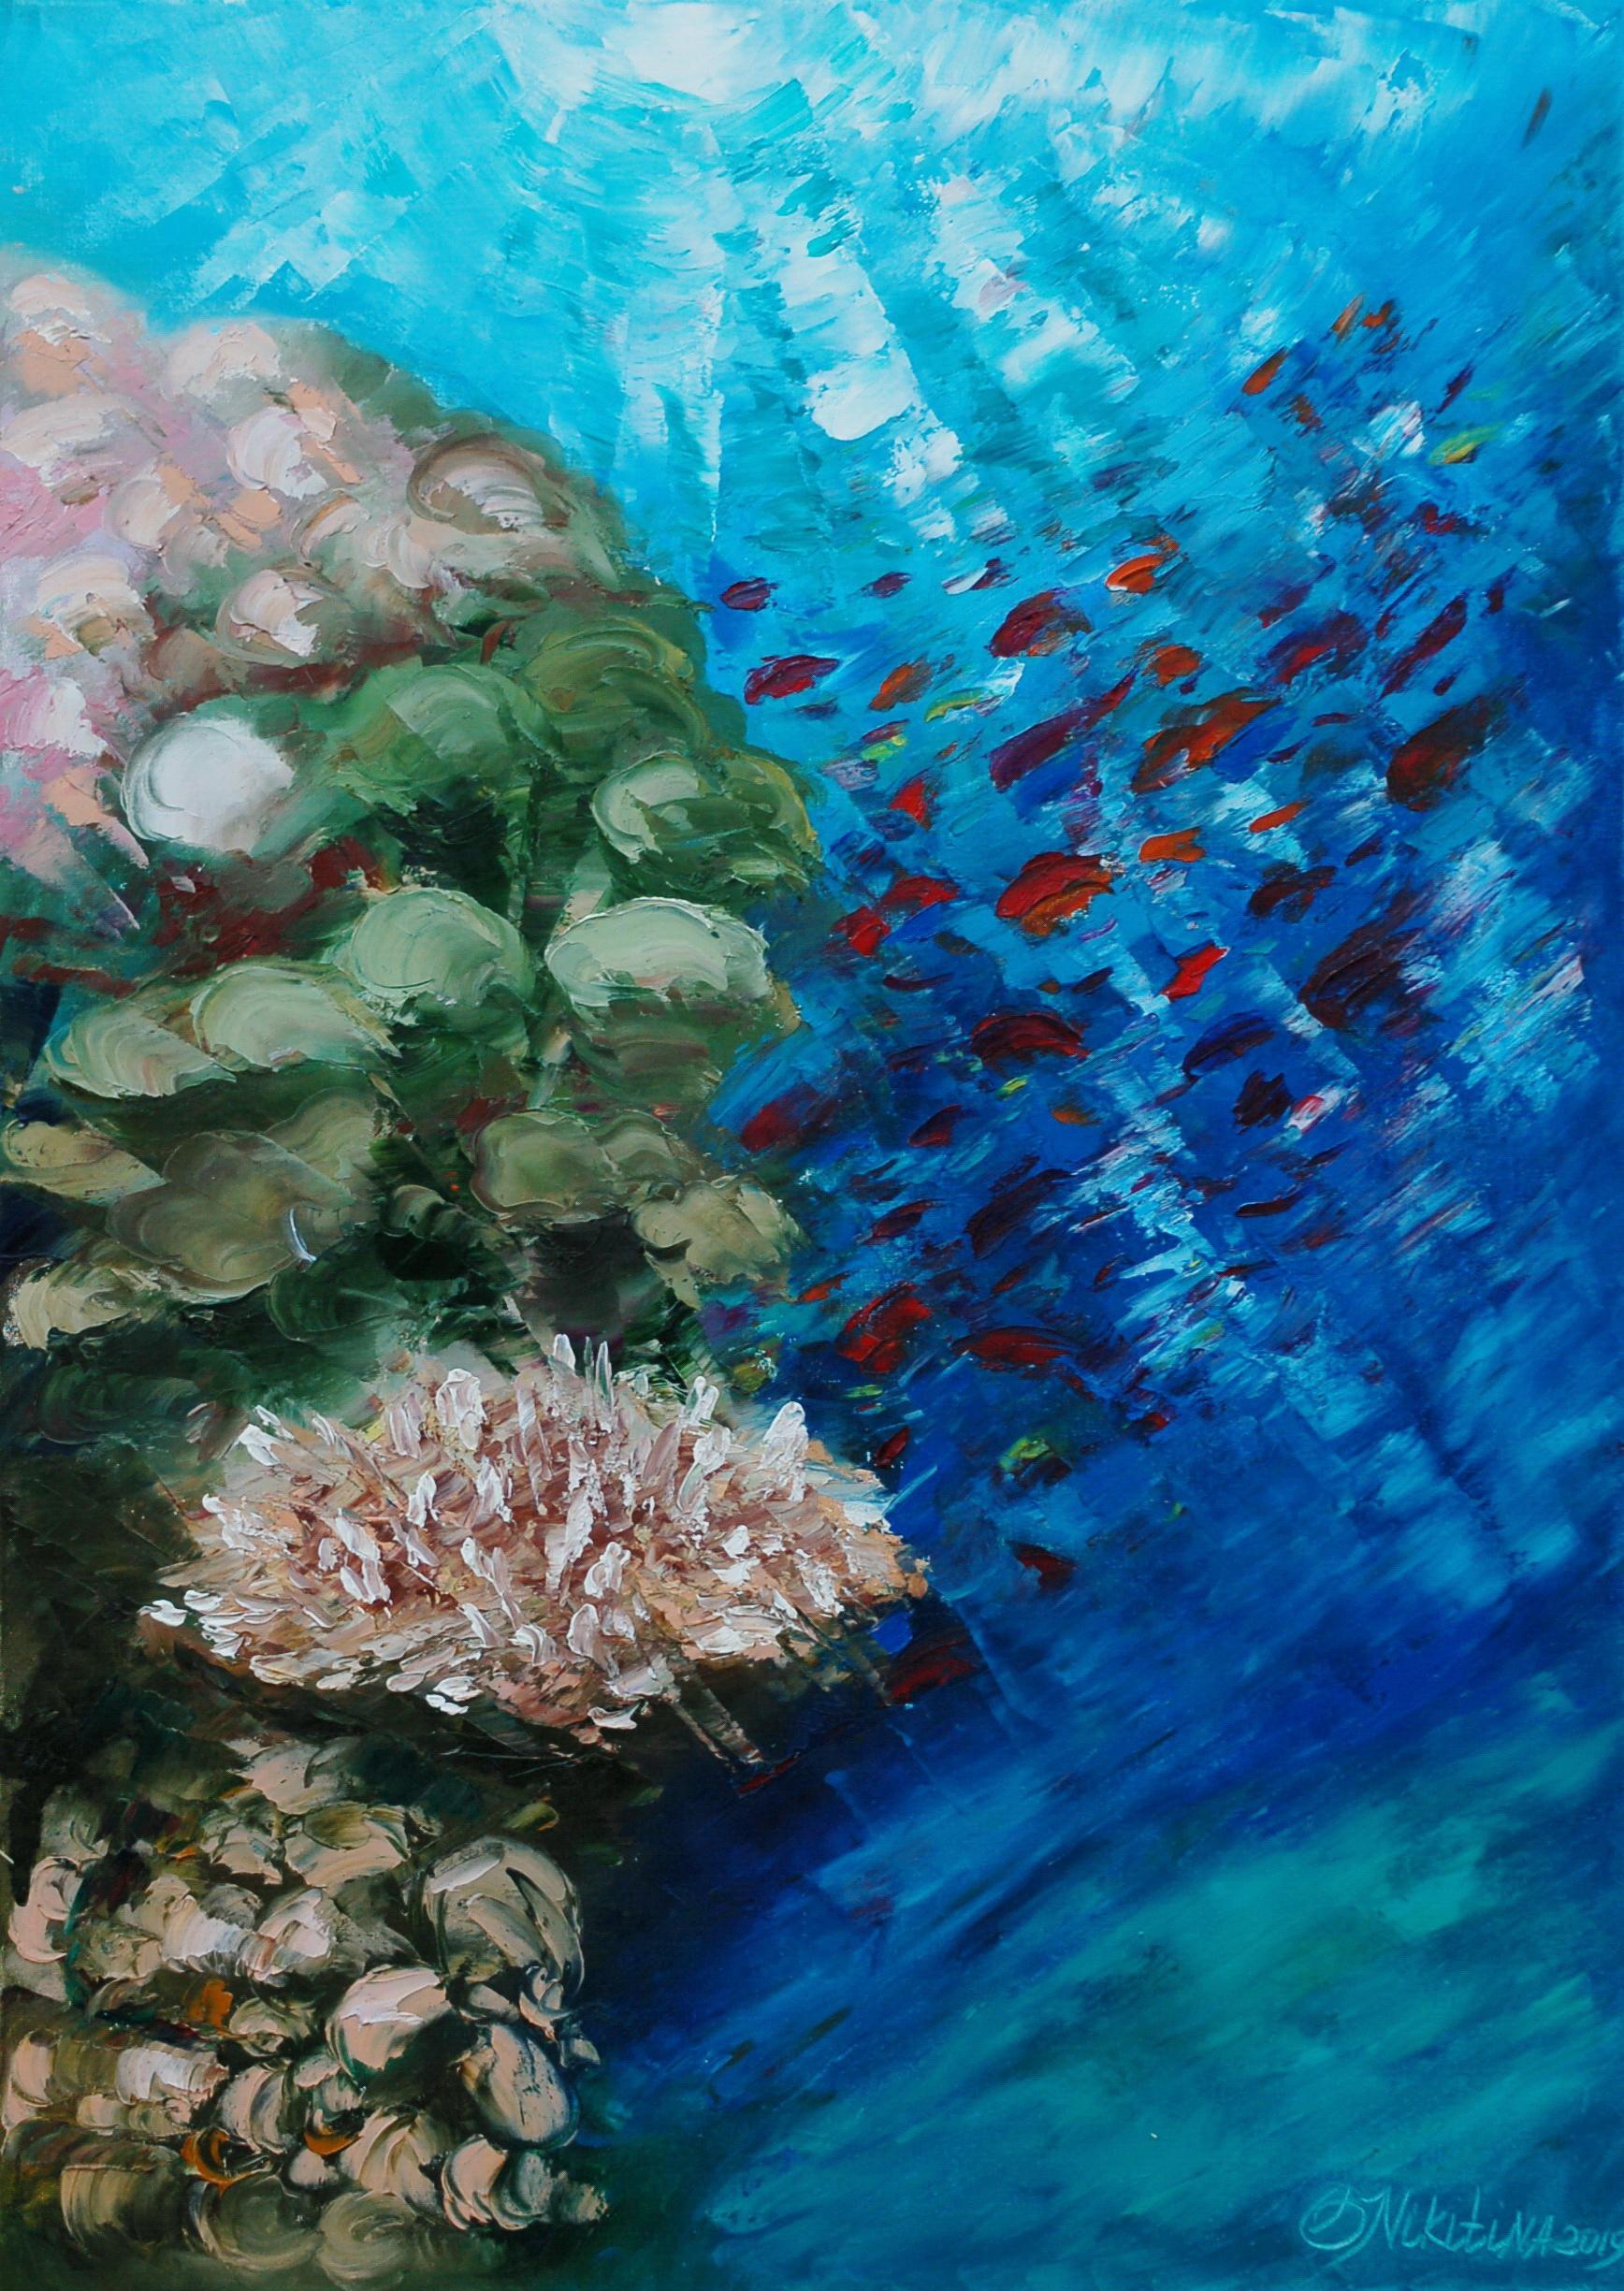 Olga Nikitina Landscape Painting - Tropical Coral Reef Underwater painting was made underwater at the depth of 8 m